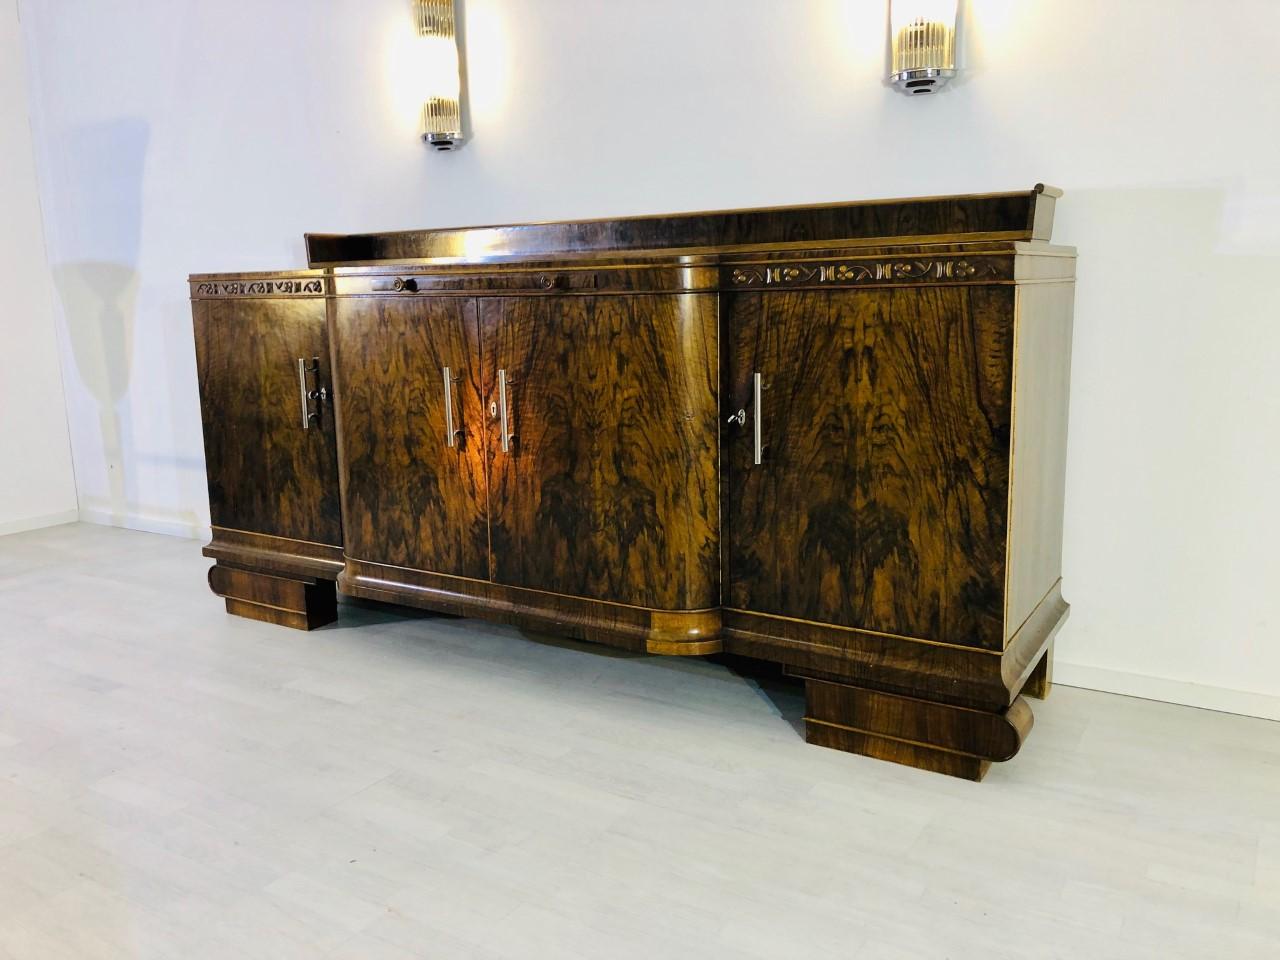 French Large Original Art Deco Sideboard made of Walnut with Cherry Ornamentation